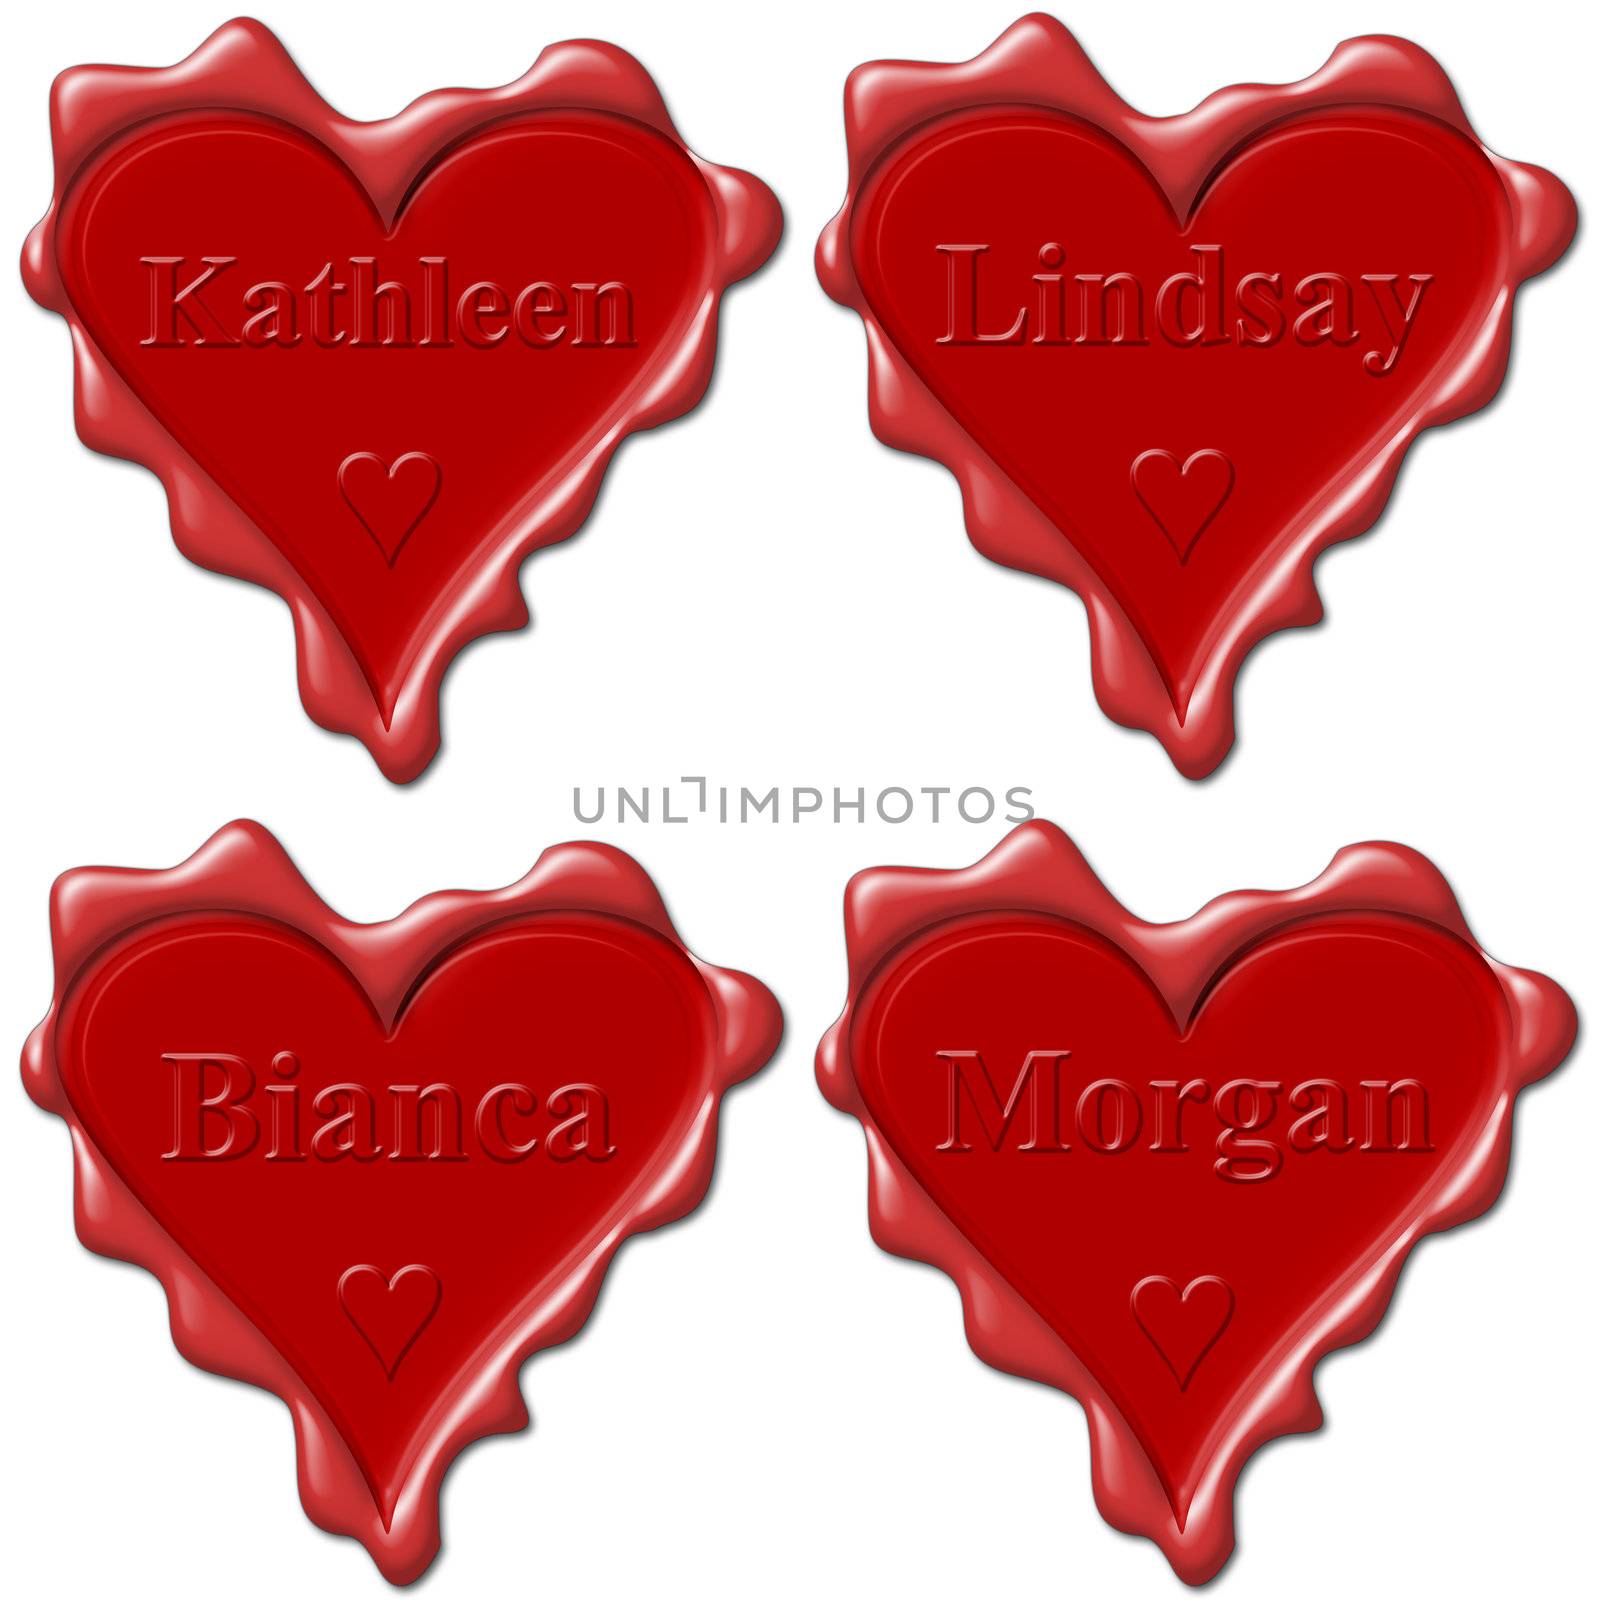 Valentine love hearts with names: Kathleen, Linsday, Bianca, Mor by mozzyb